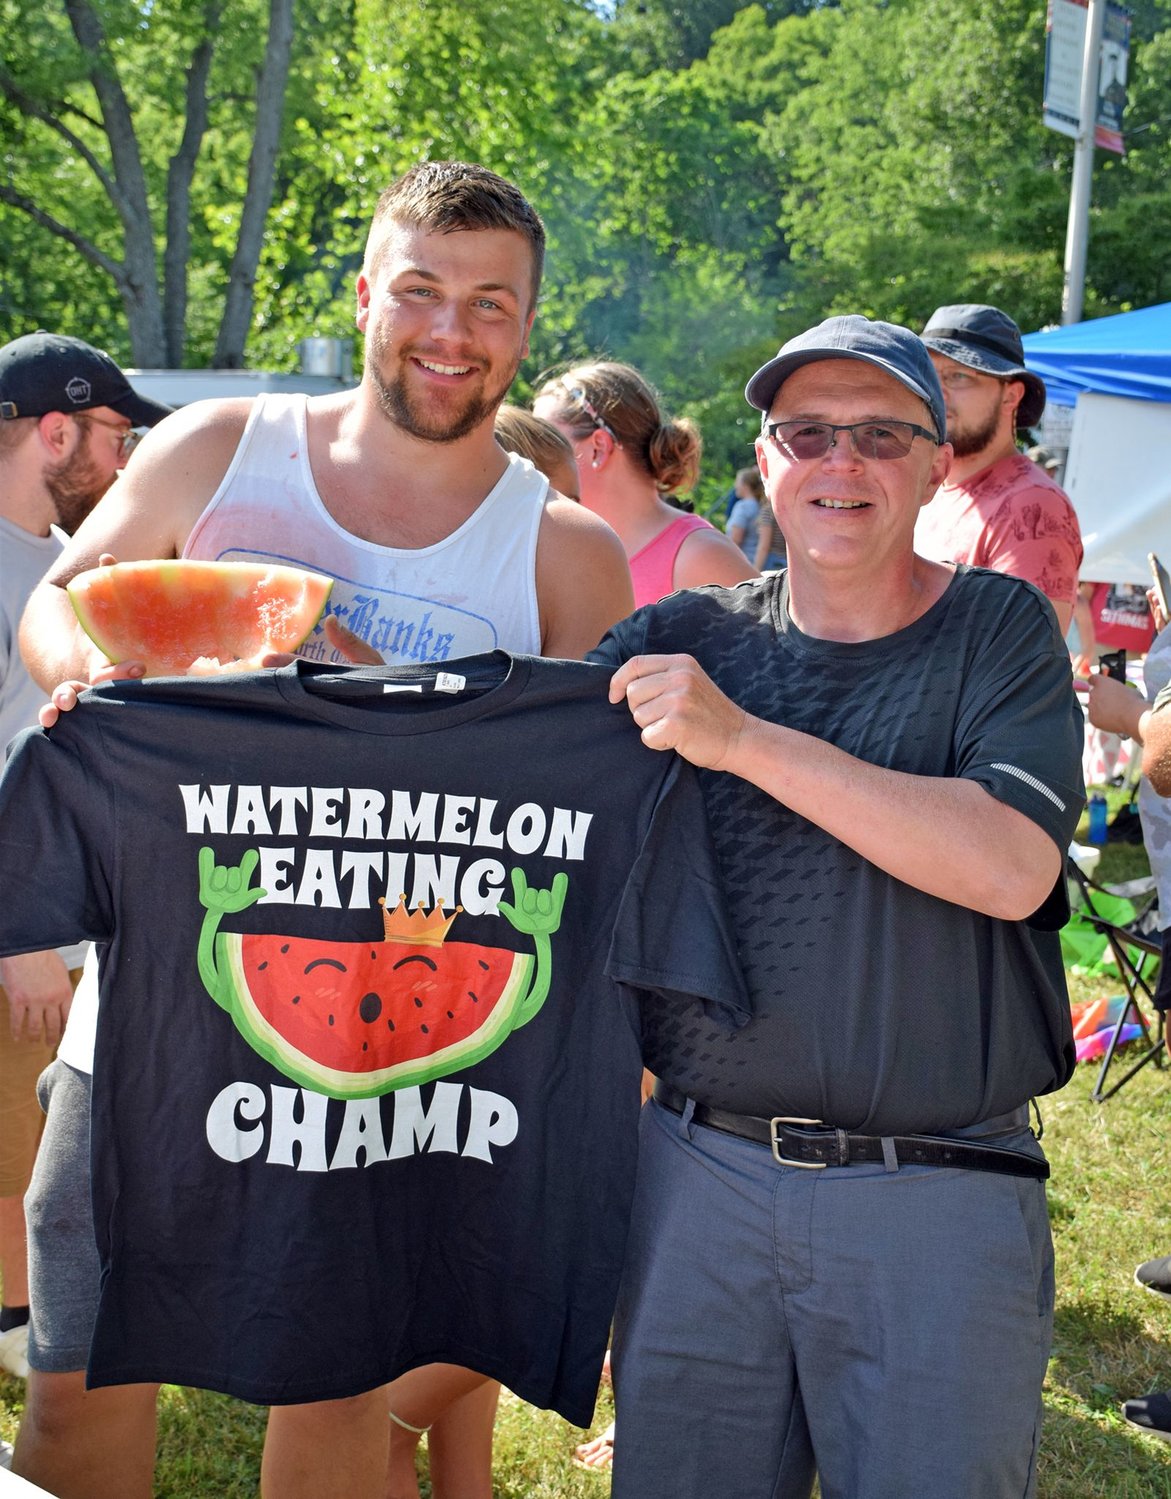 Chris Adams won first place and received a Watermelon Eating Champ T-shirt from the Rev. Jeff Wargo of St. Stephen’s UCC, the game sponsor.